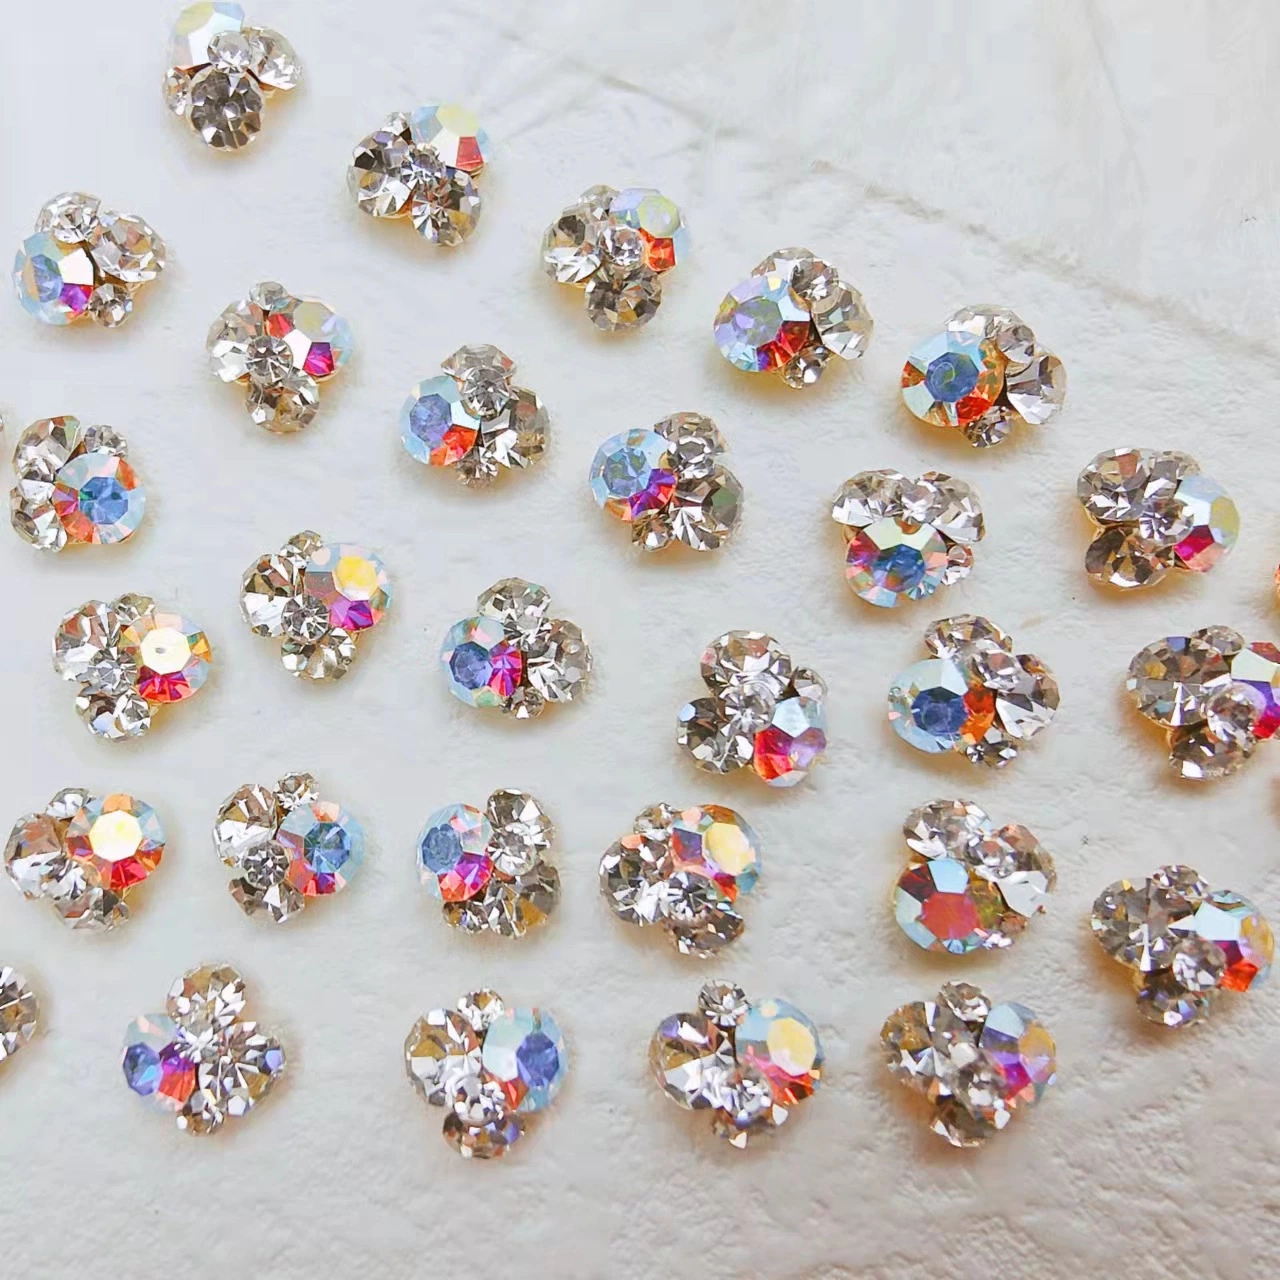 Nail Art Accessories Wholesale Alloy Pile Diamond Finished Product Size of Rhine-Nail Paste Accessories New Japanese Three-Dimensional Decoration